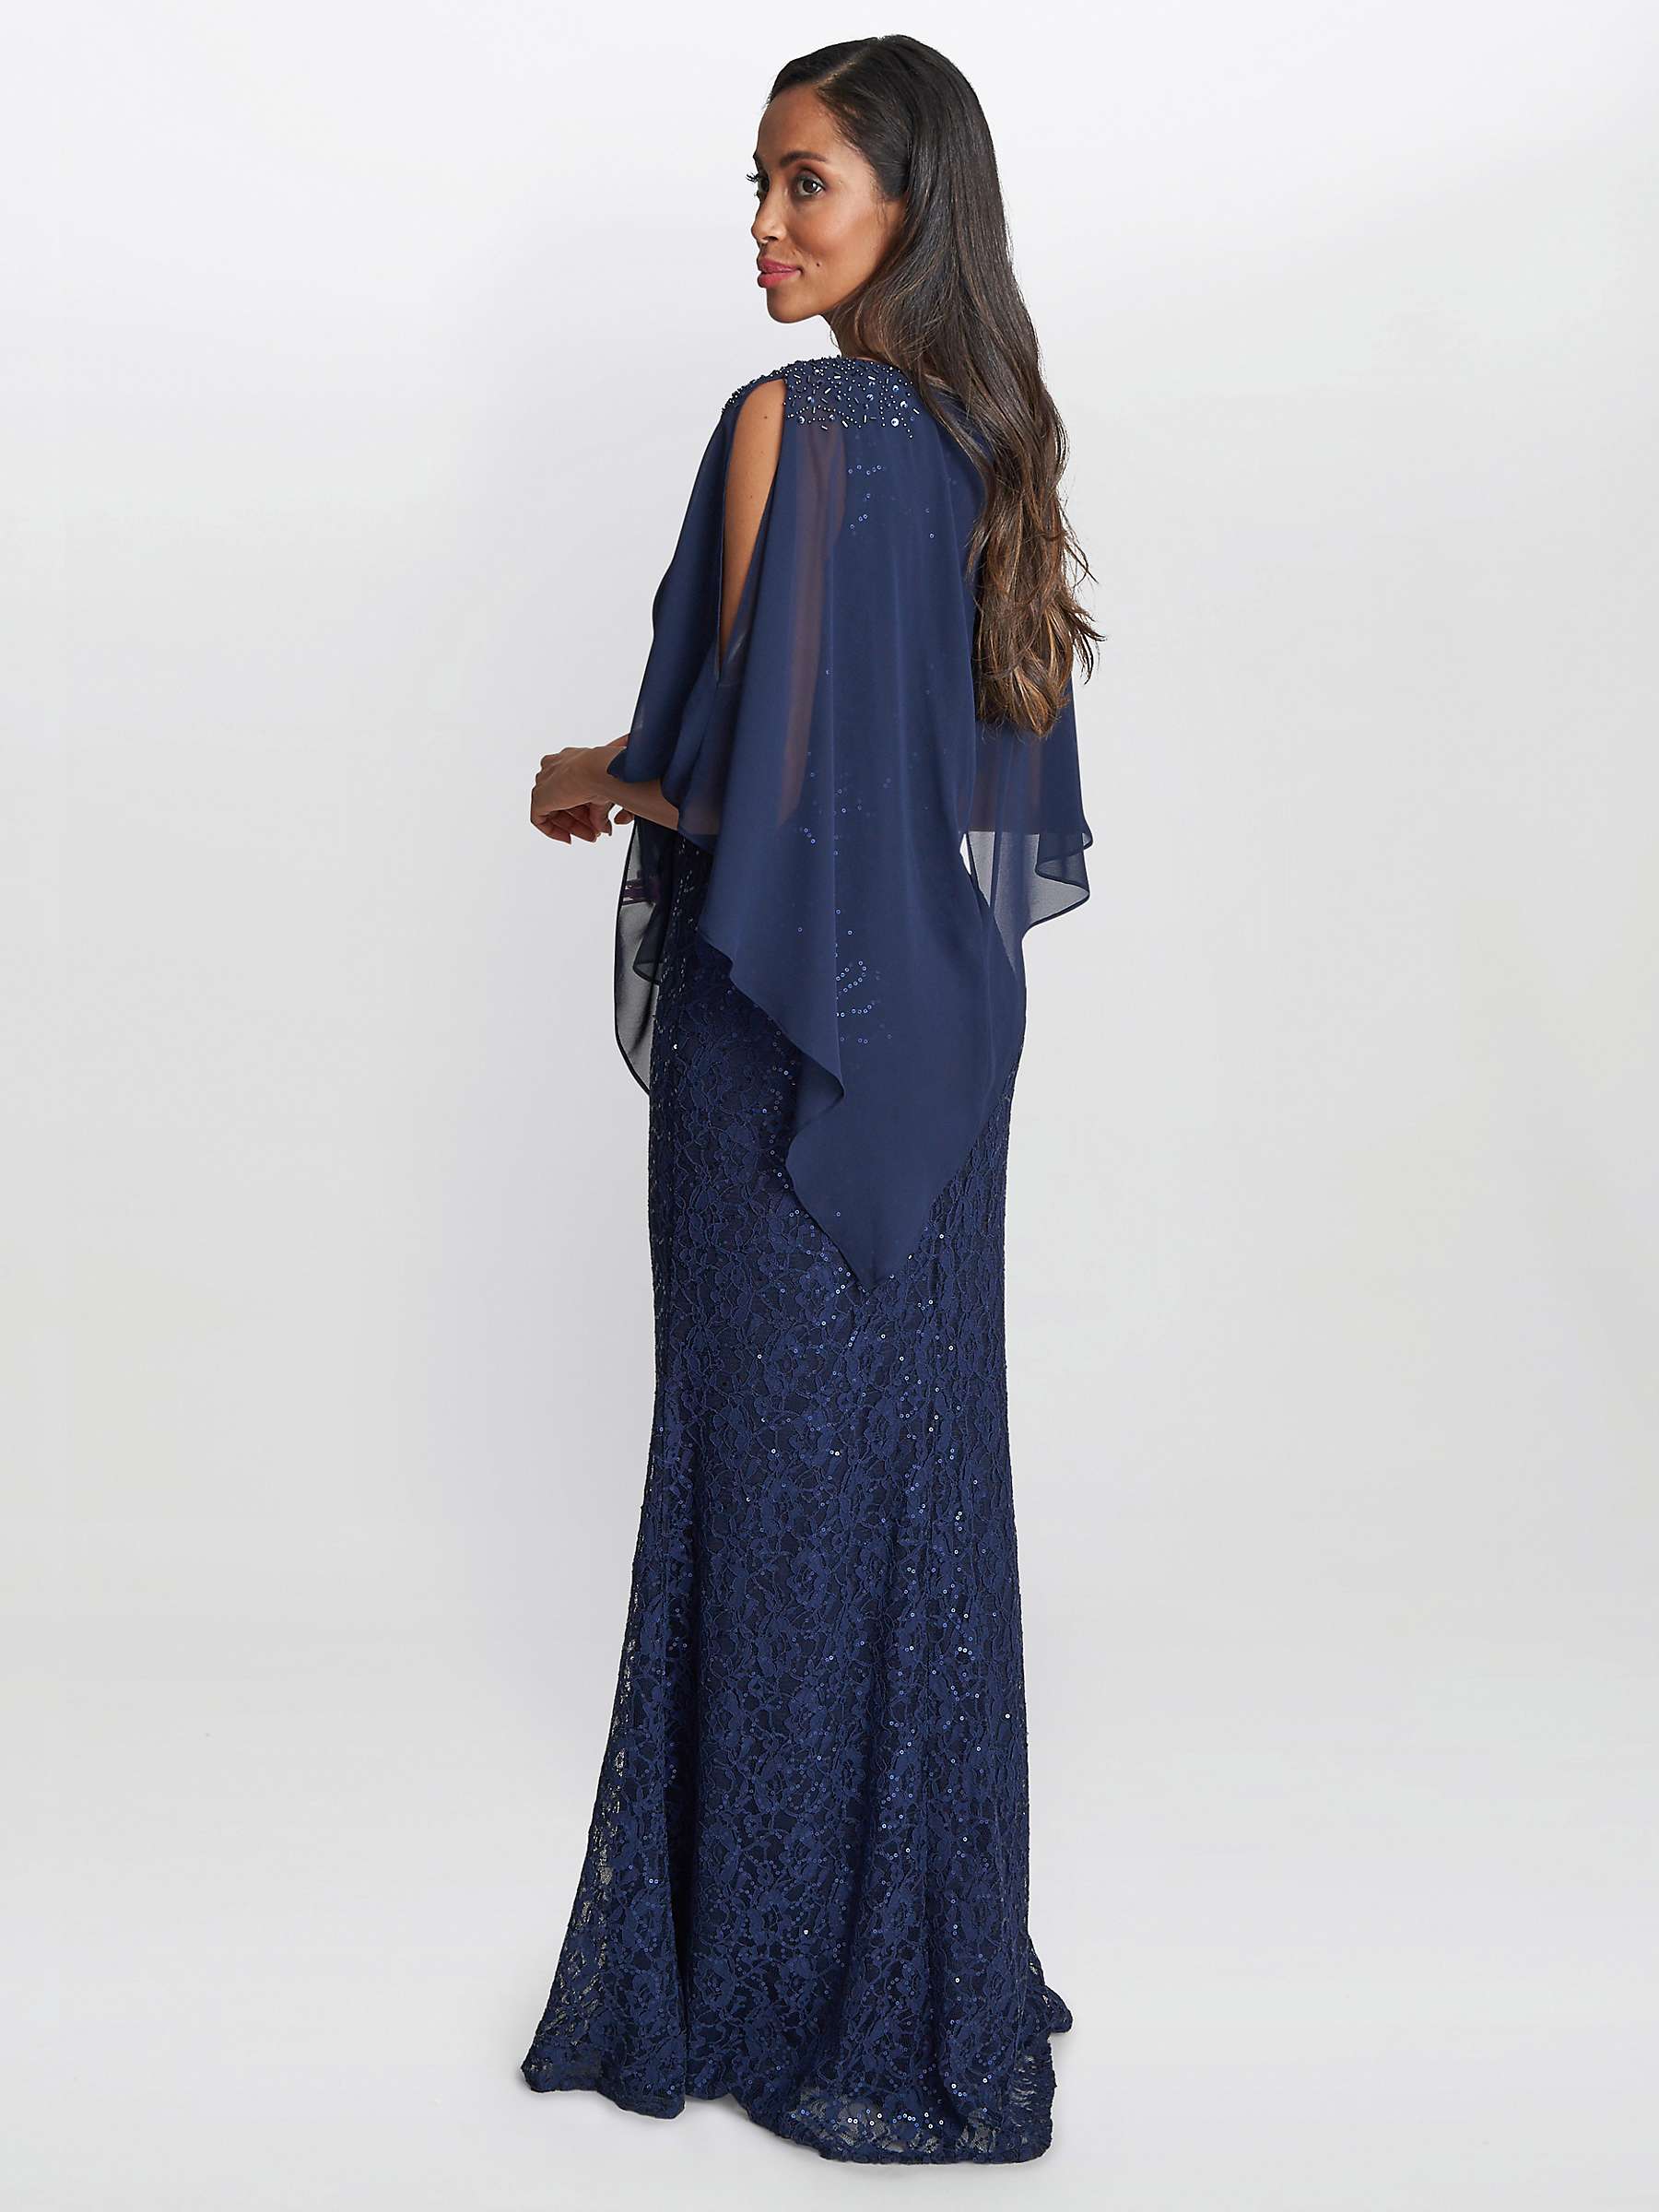 Buy Gina Bacconi Ginger Sequin Lace Dress with Chiffon Cape, Spring Navy Online at johnlewis.com